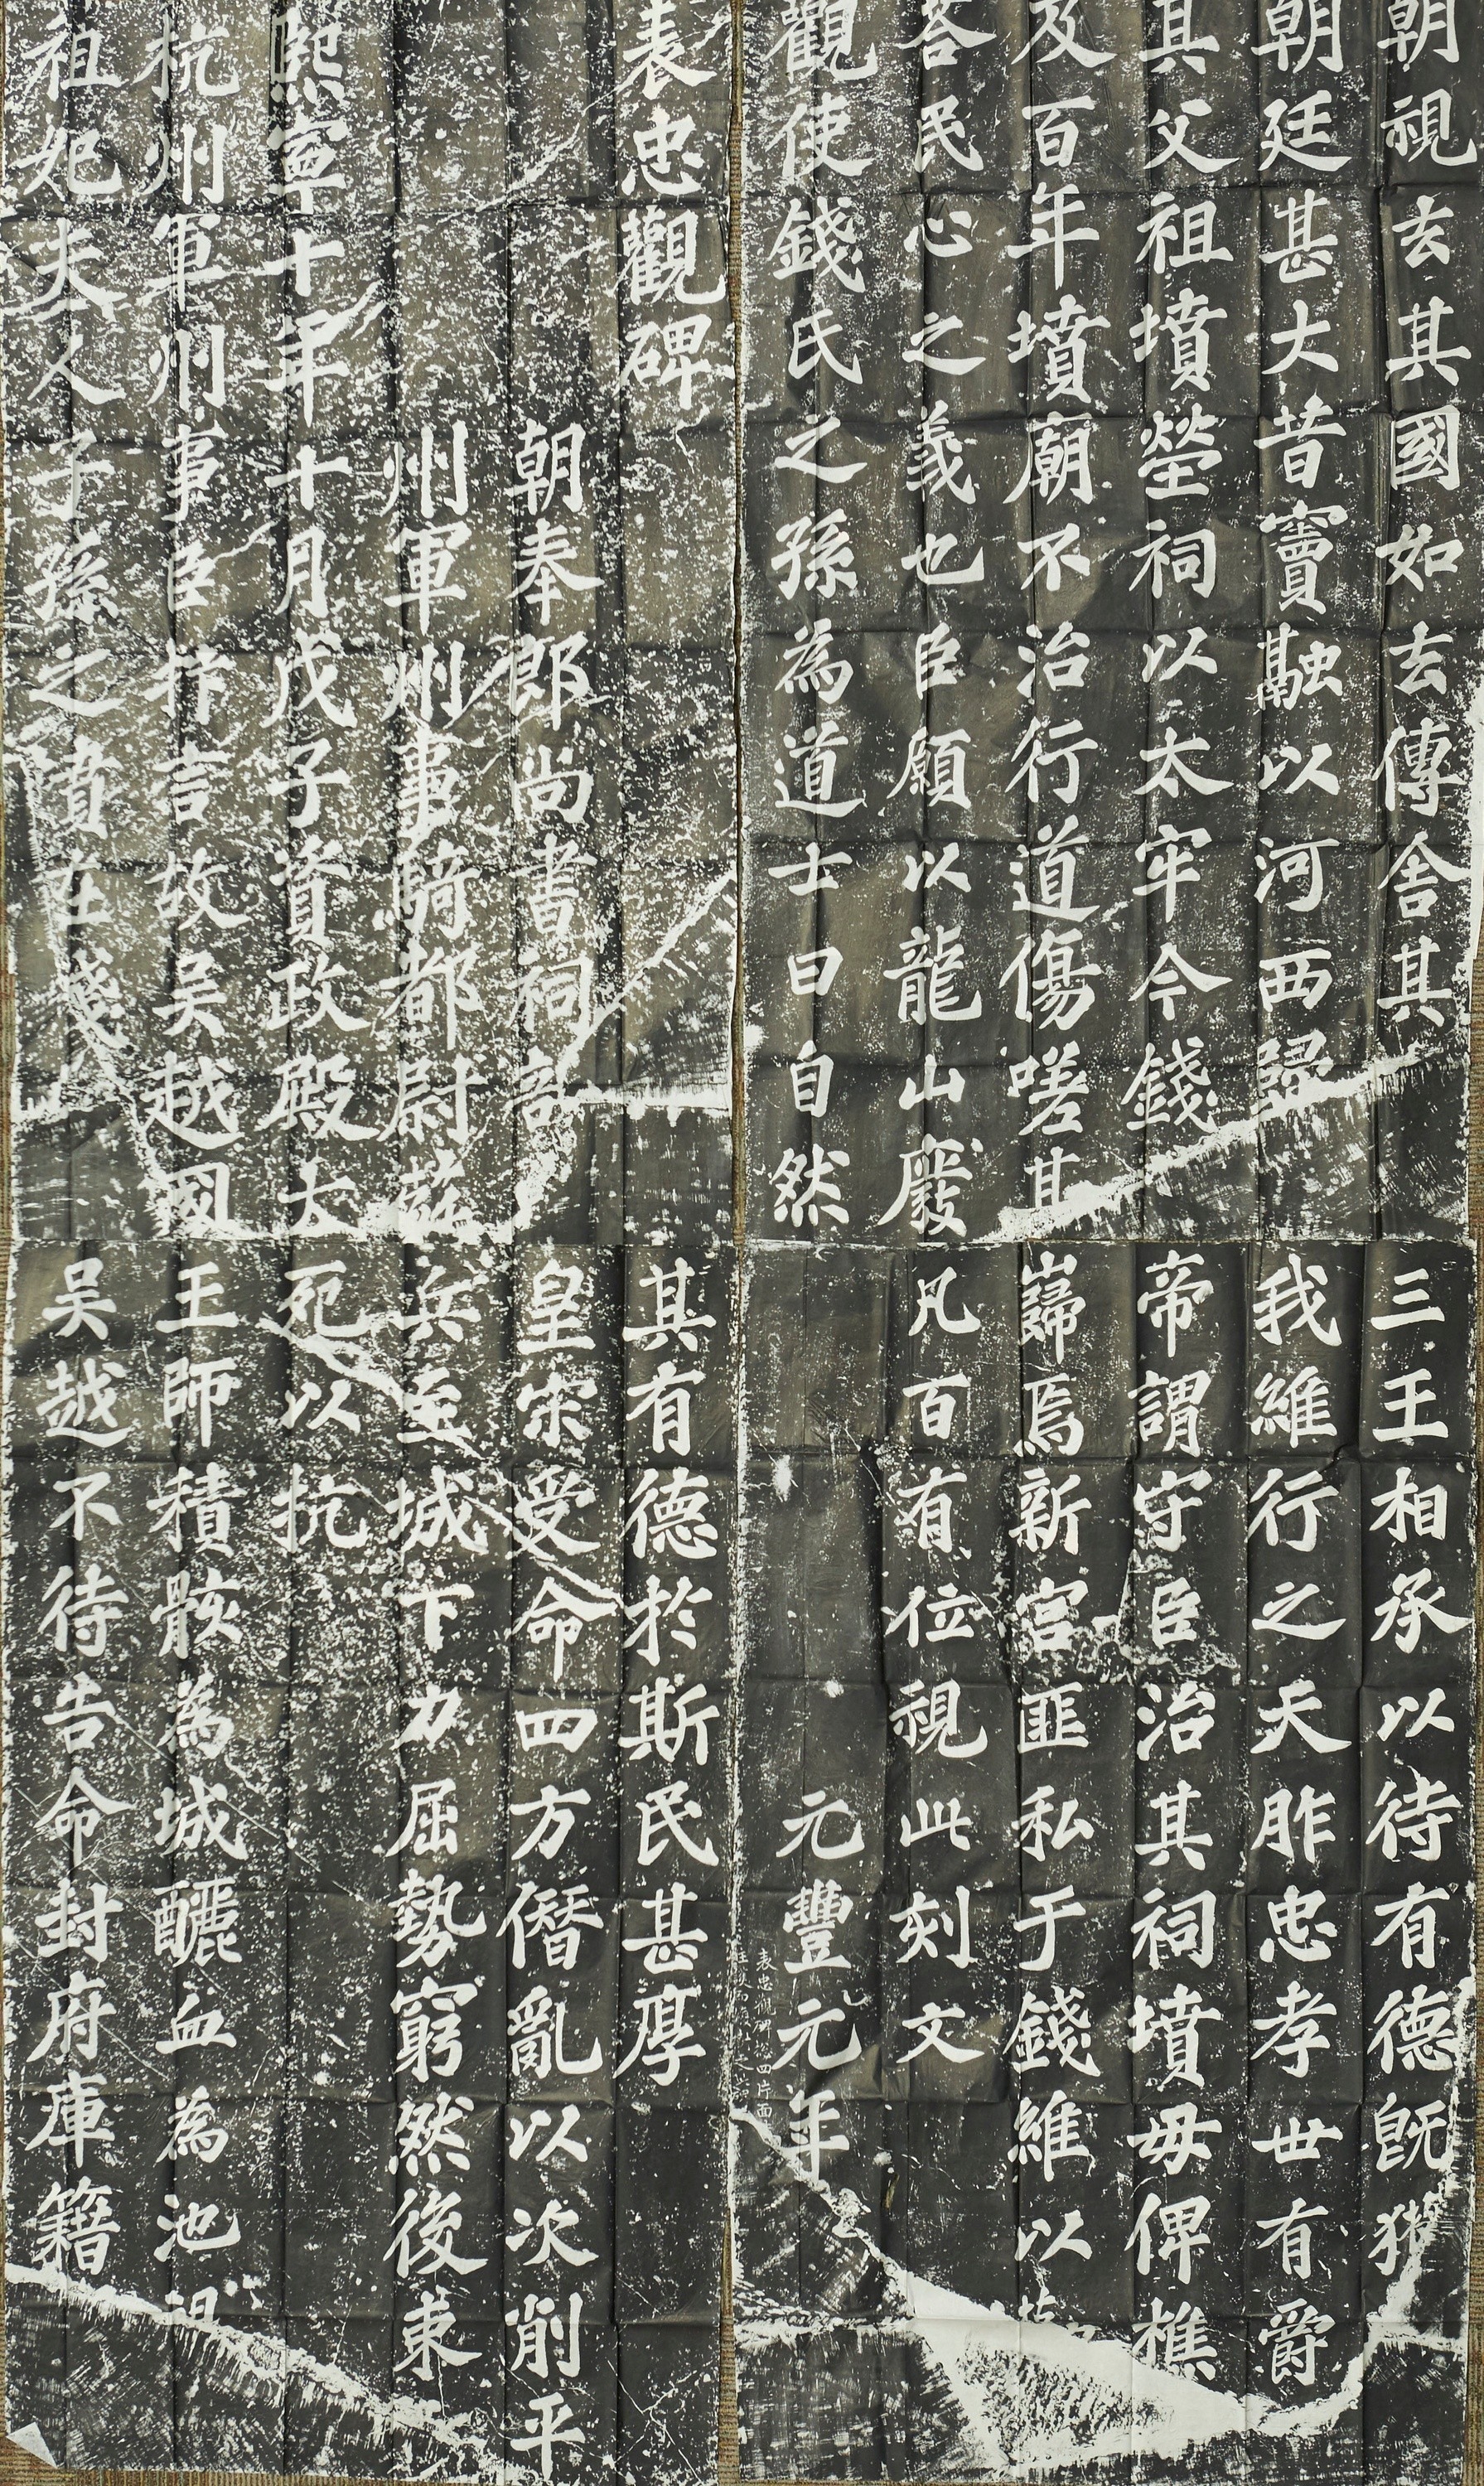 Group of Chinese Buddhist Temple Rubbings - Image 3 of 10